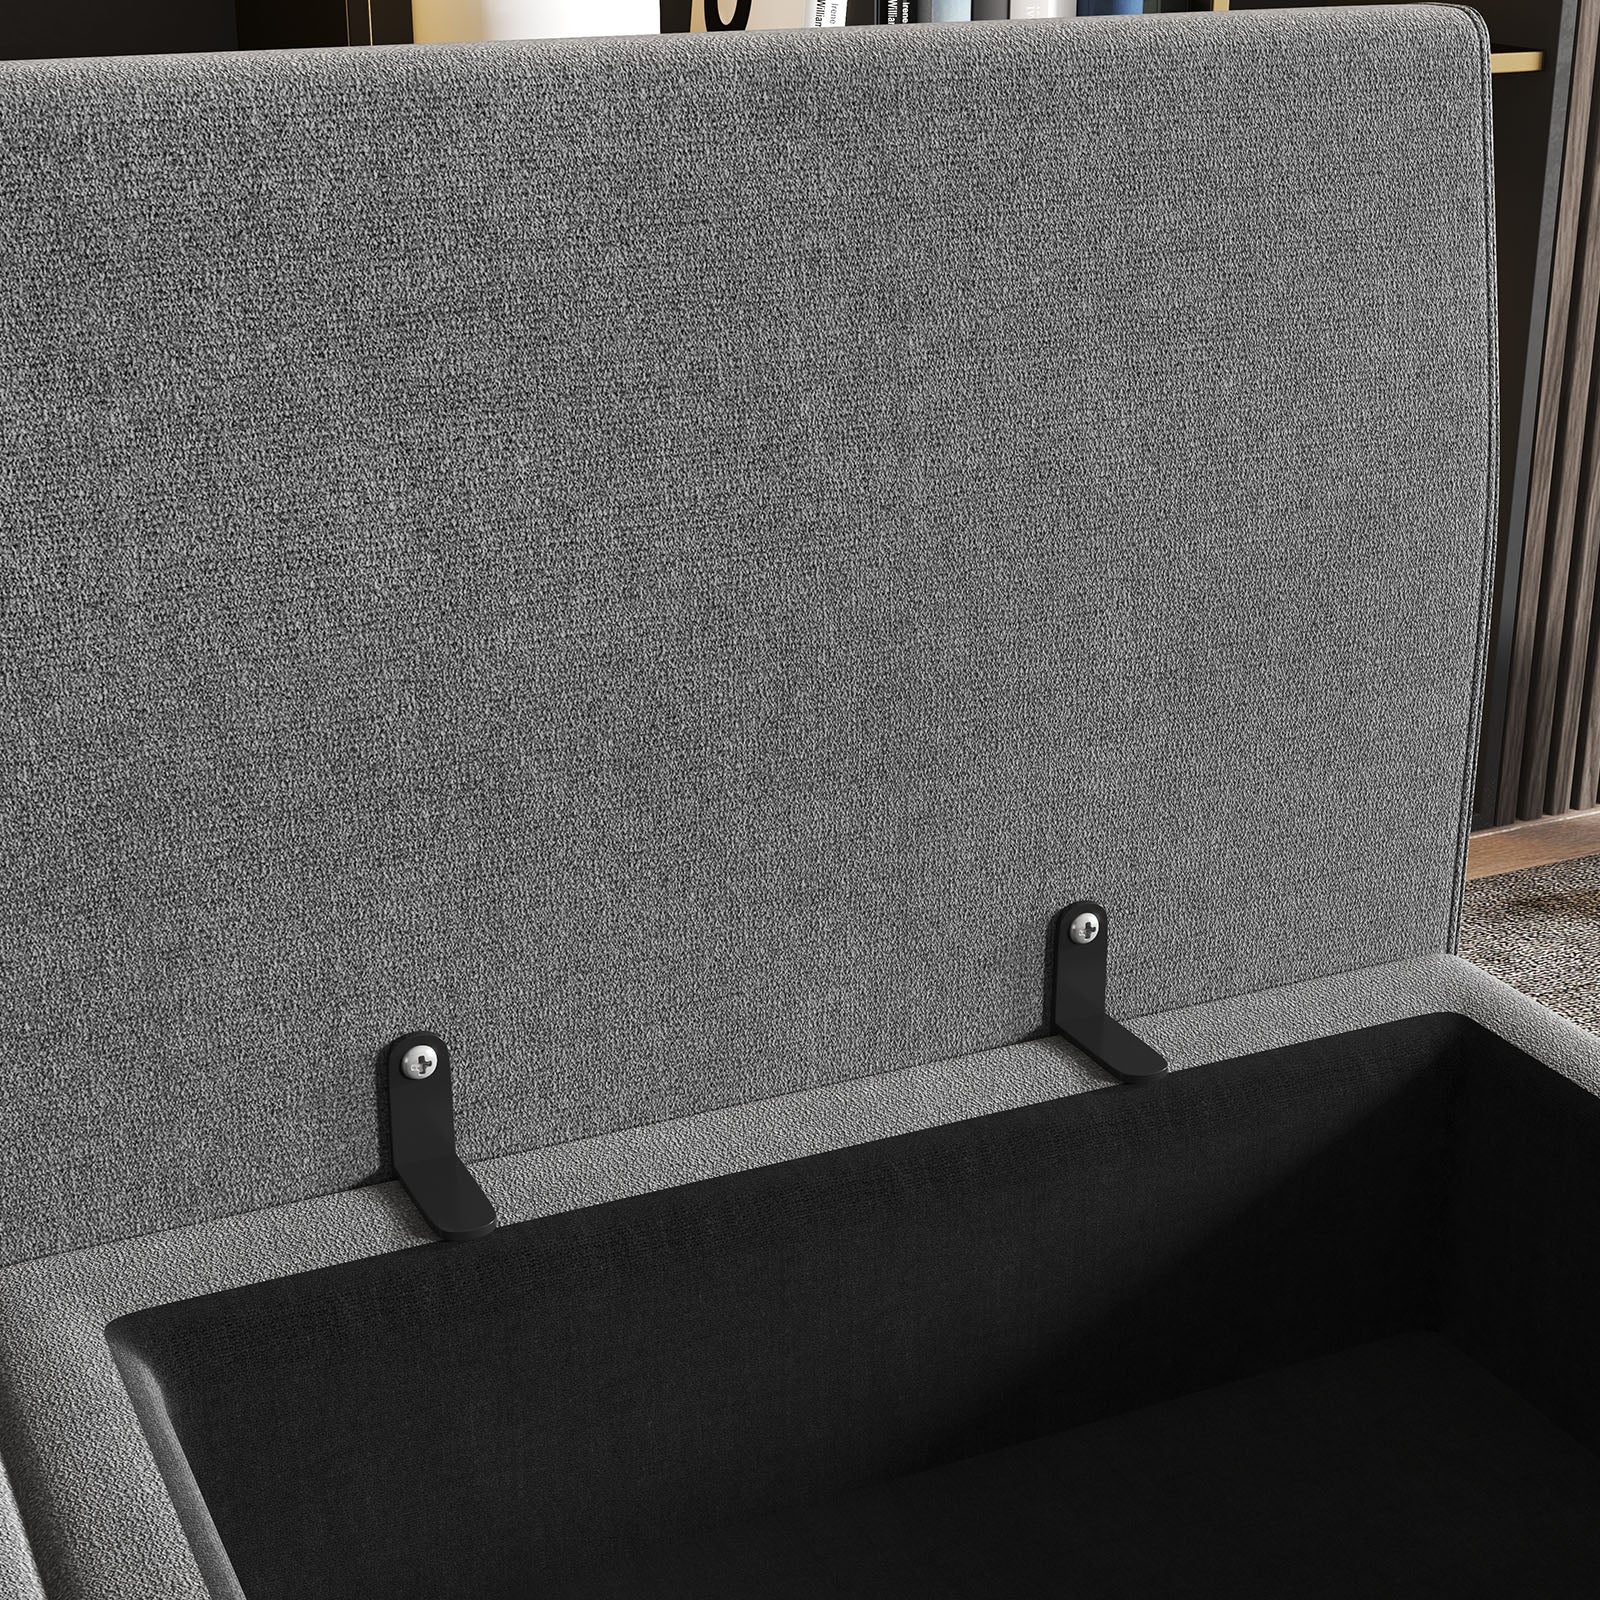 HONBAY Removable Backrest Frame with 2 Connectors for Modular Sofa（not included pillows）